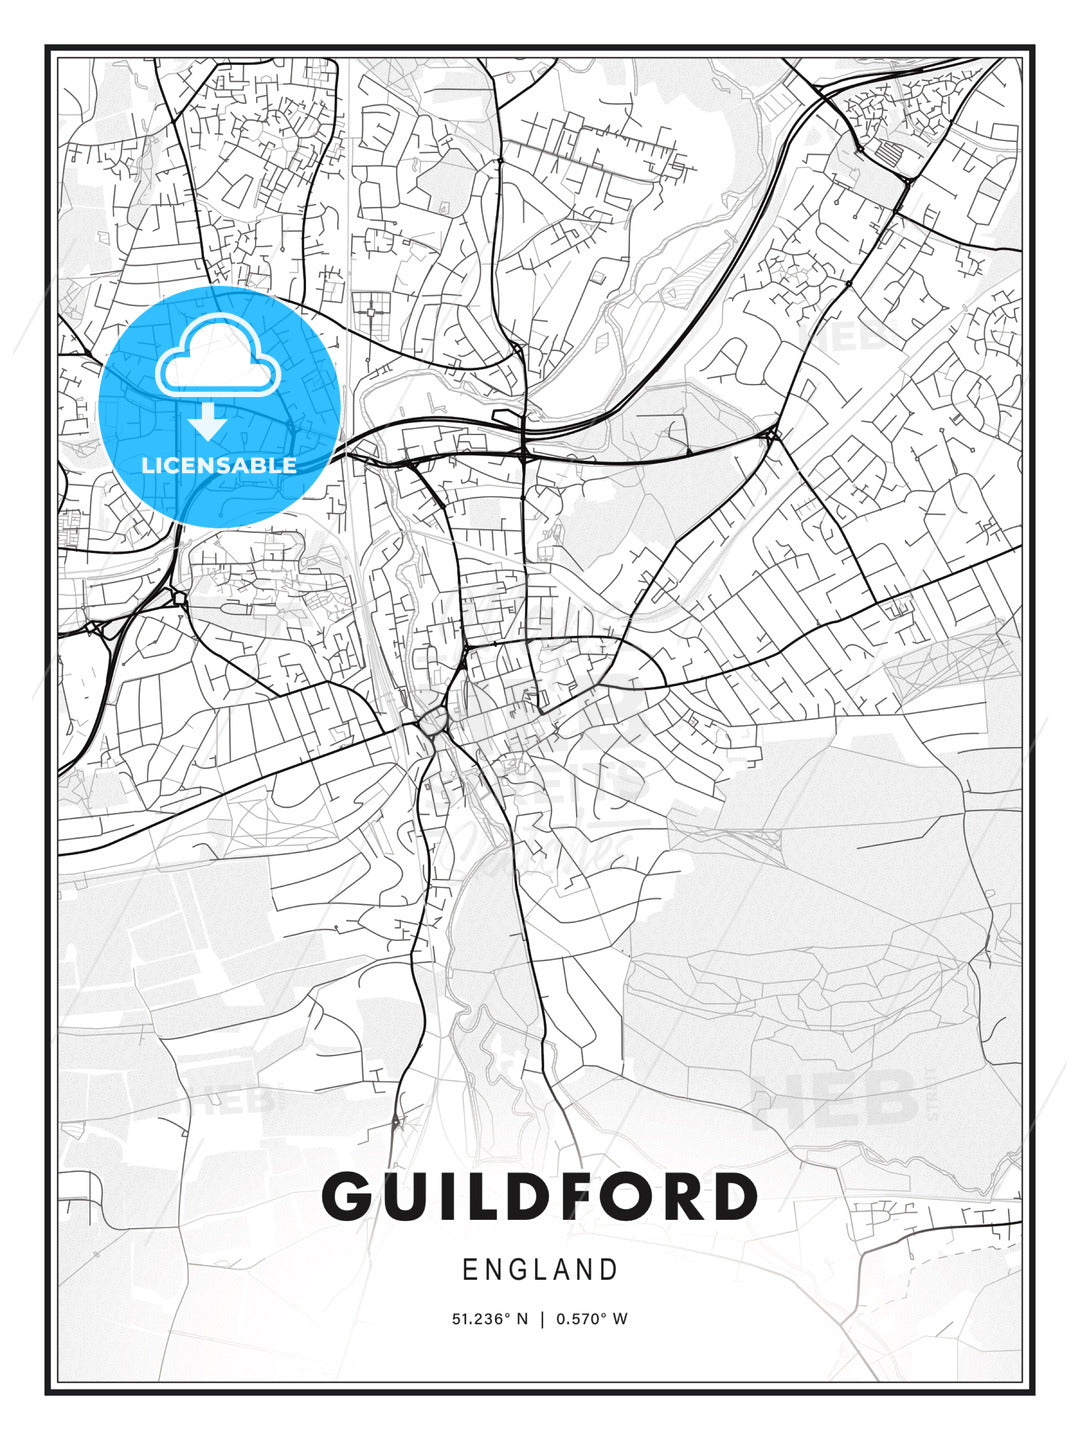 Guildford, England, Modern Print Template in Various Formats - HEBSTREITS Sketches